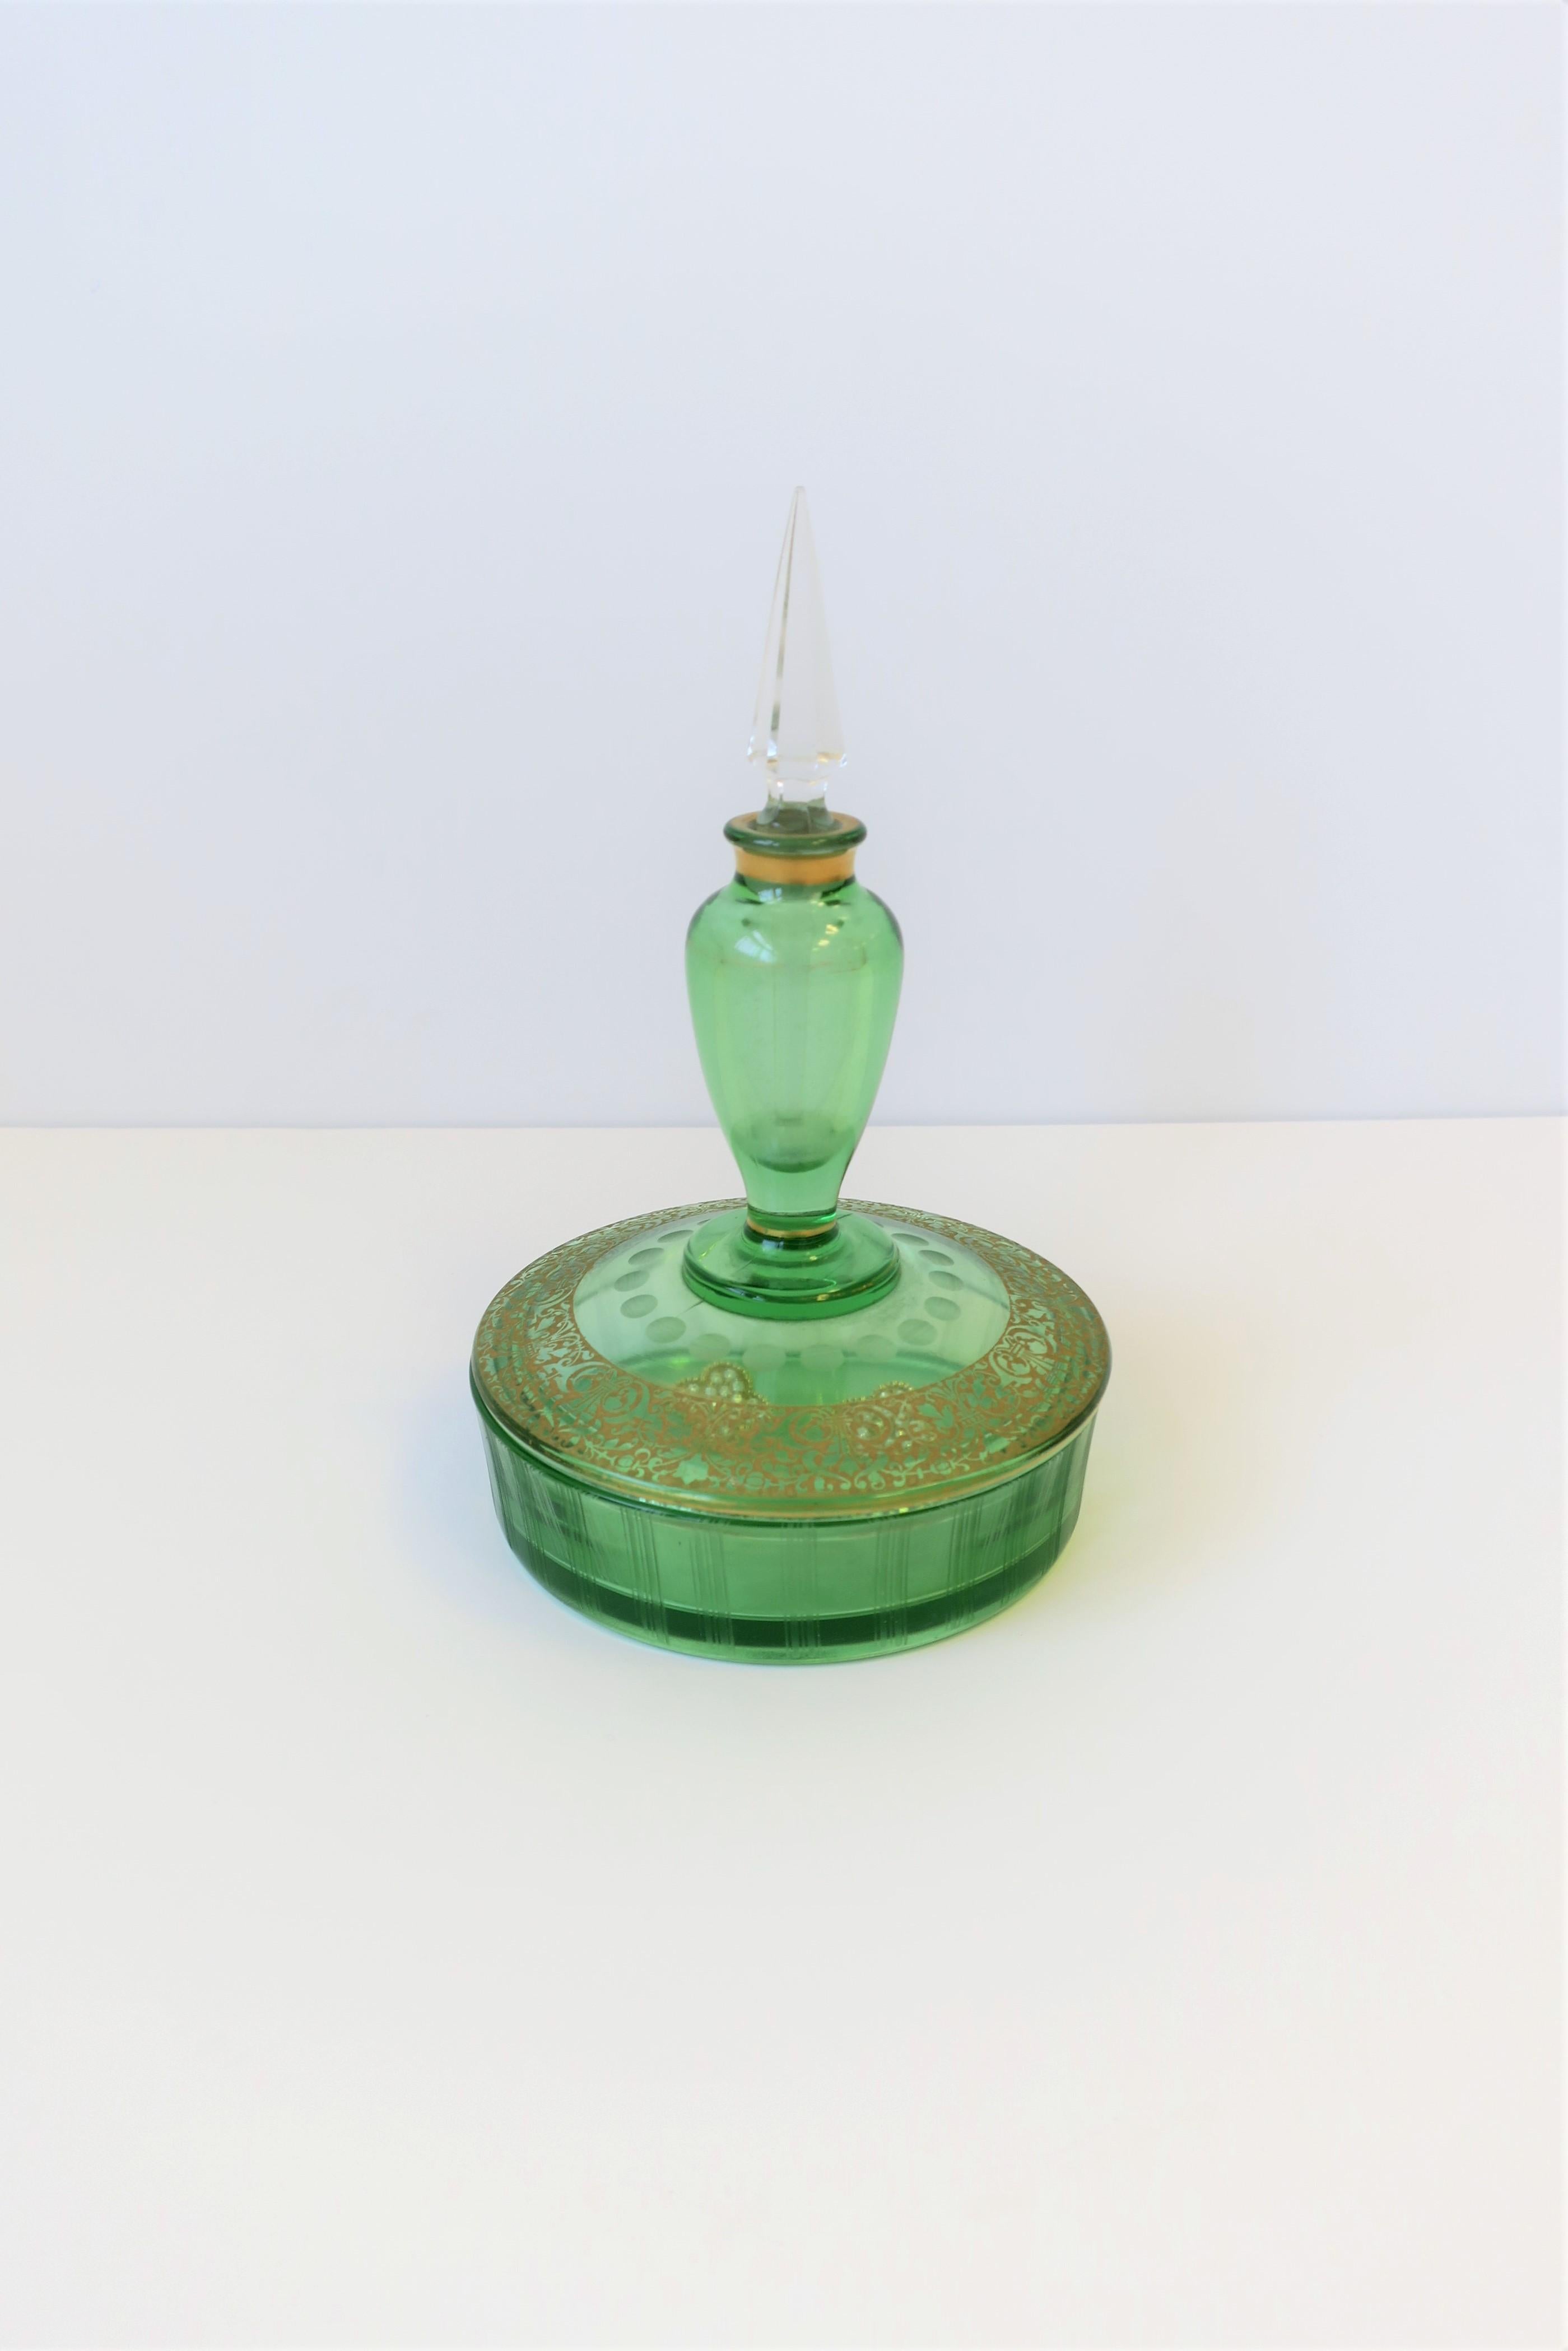 A beautiful Italian green glass and gold gilt round jewelry box and perfume vanity bottle, circa mid-20th century, Italy. This is a rare piece; a box and perfume bottle in one. Piece has beautiful cut crystal stopper/dabber.

            